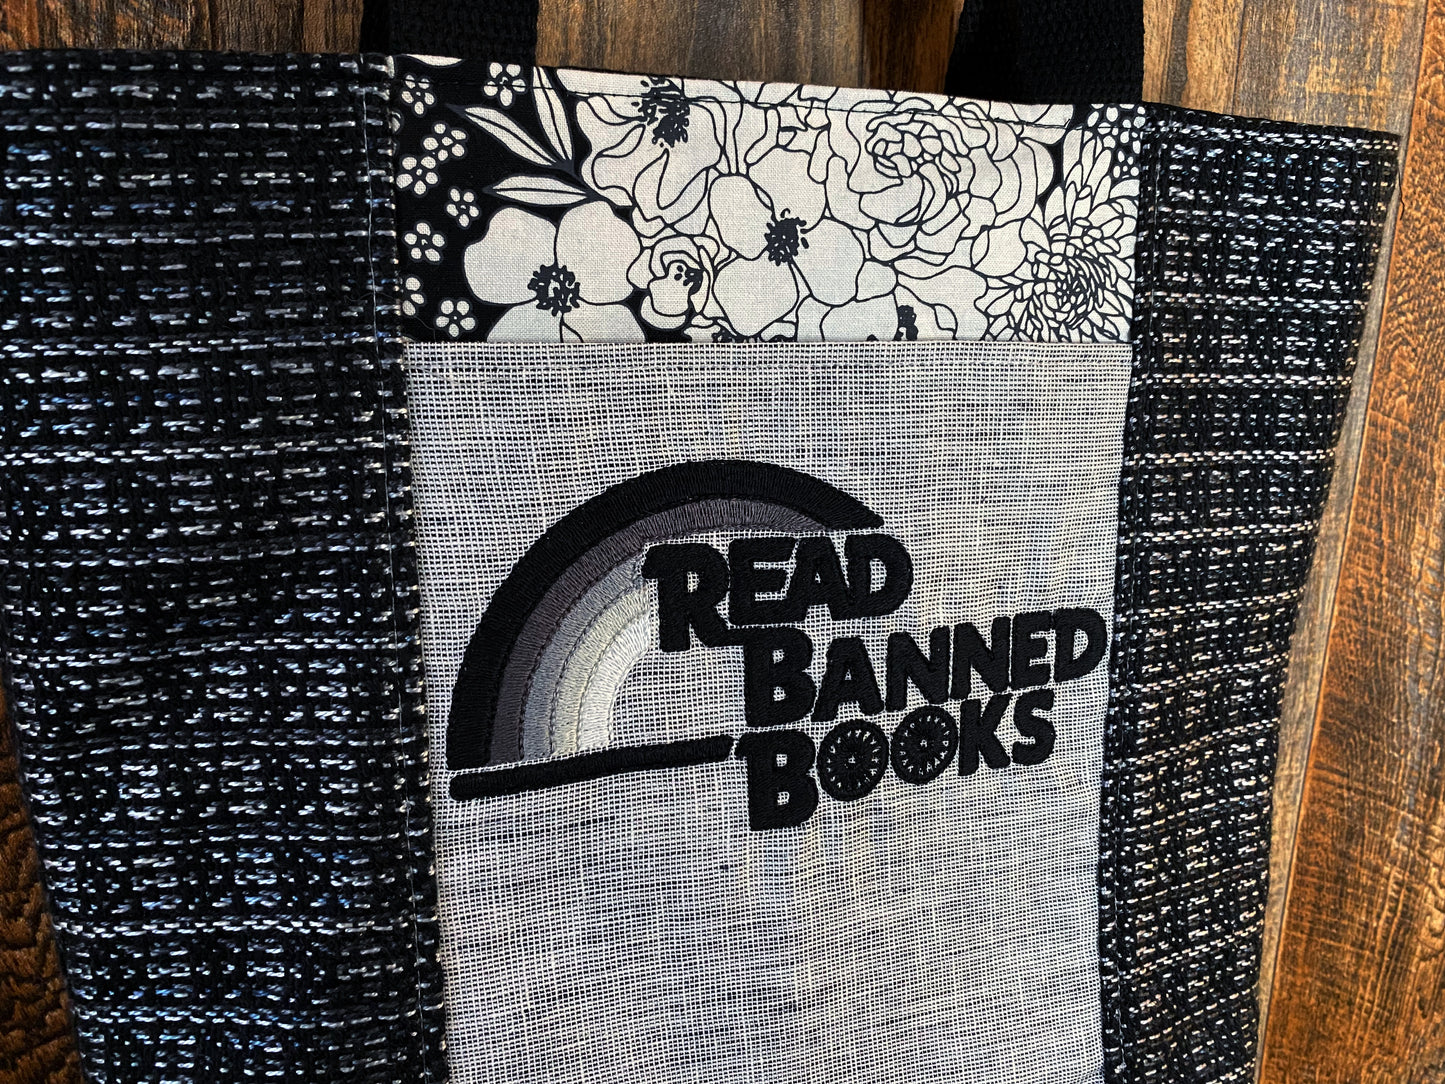 Monochrome Read Banned Books Library Tote Bag